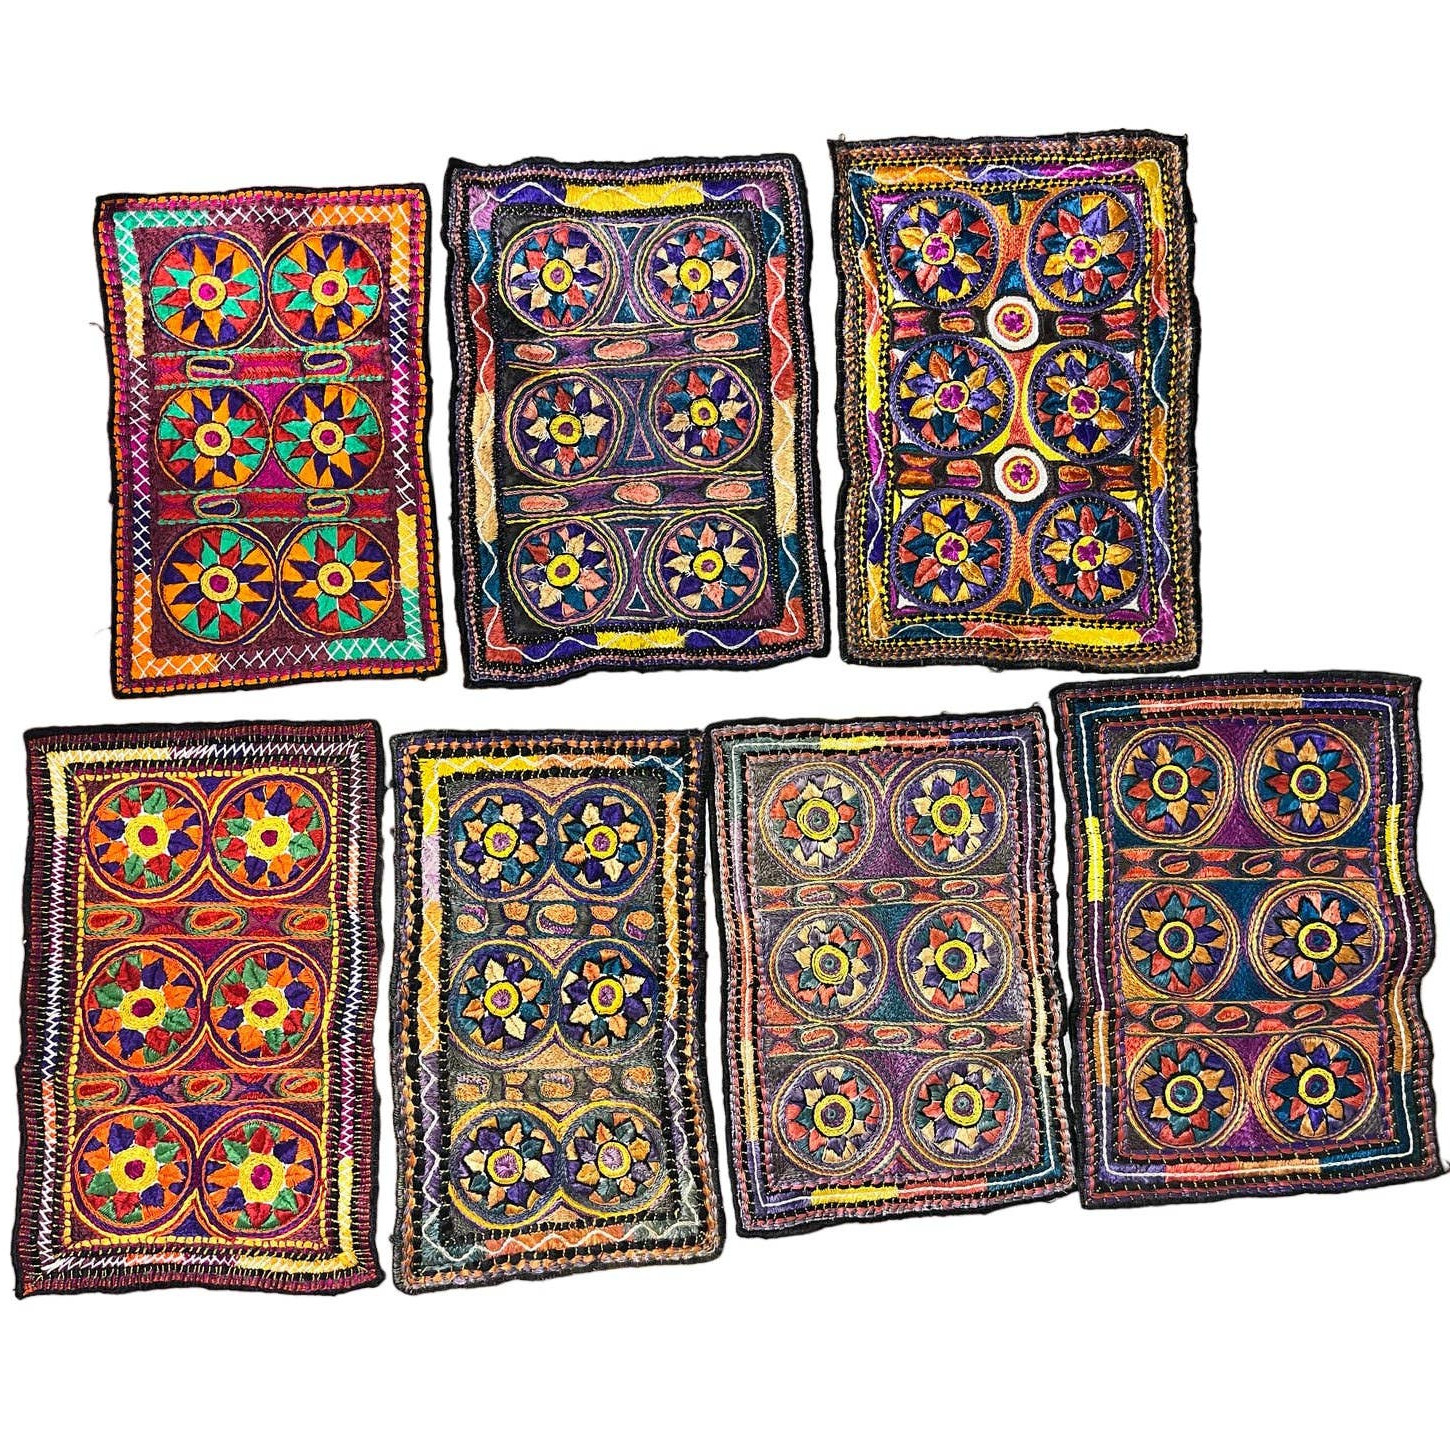 One of a Kind Vintage Hand Embroidered Ethnic Placemats Lot of 7